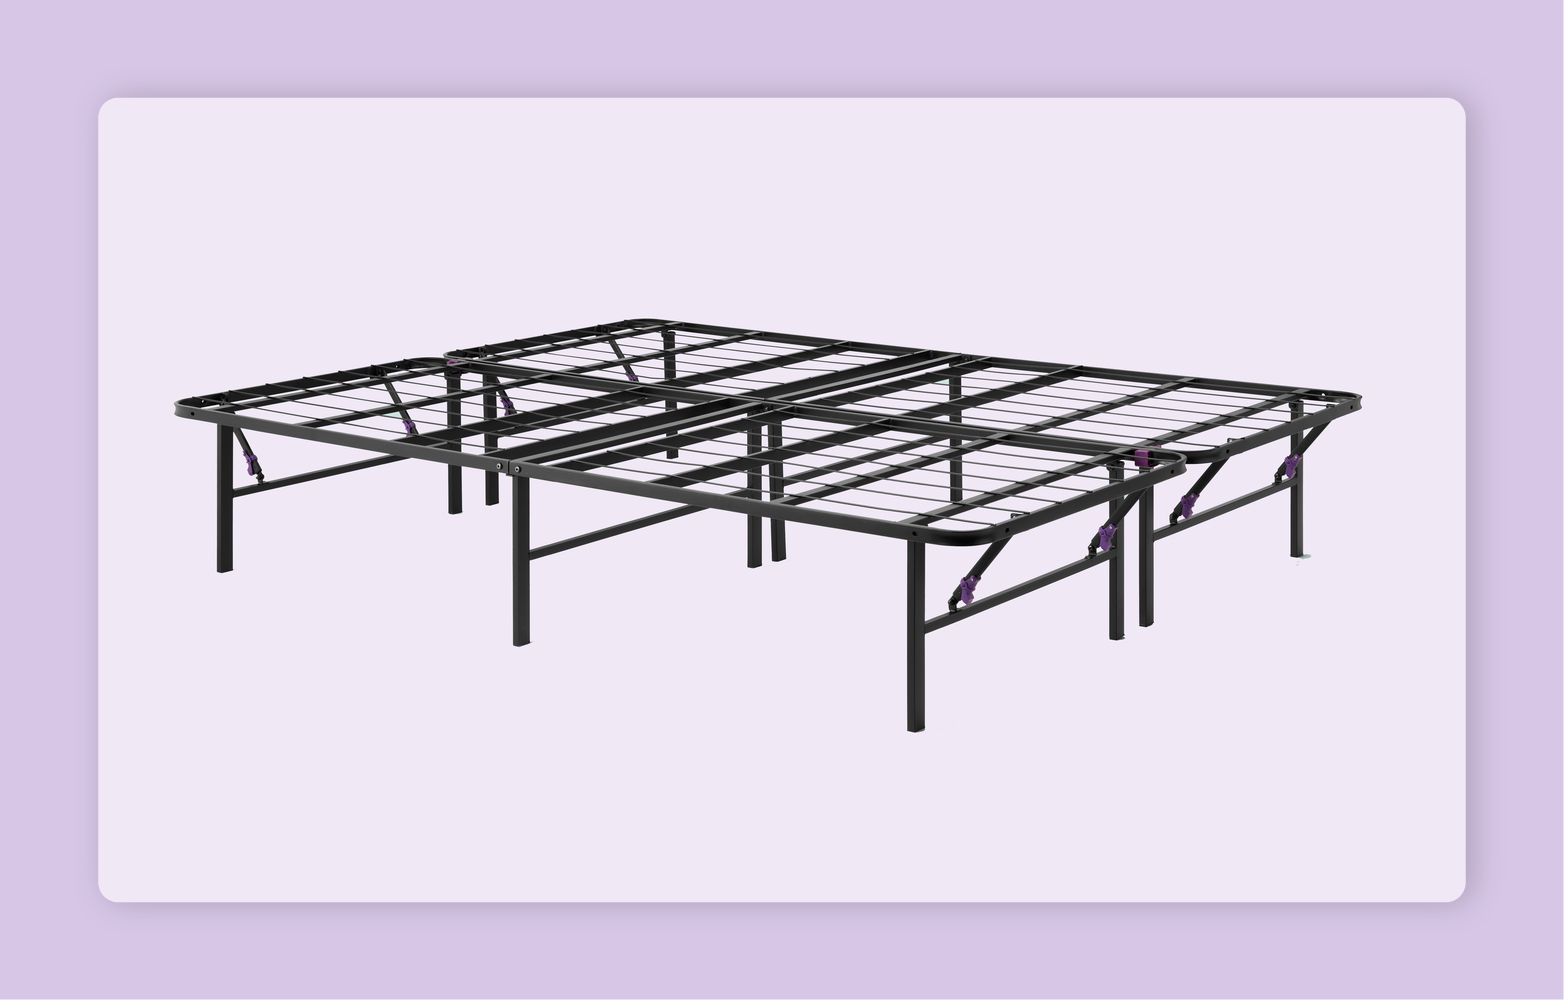 The metal Purple Platform Bed Frame lays flat before a light purple background.